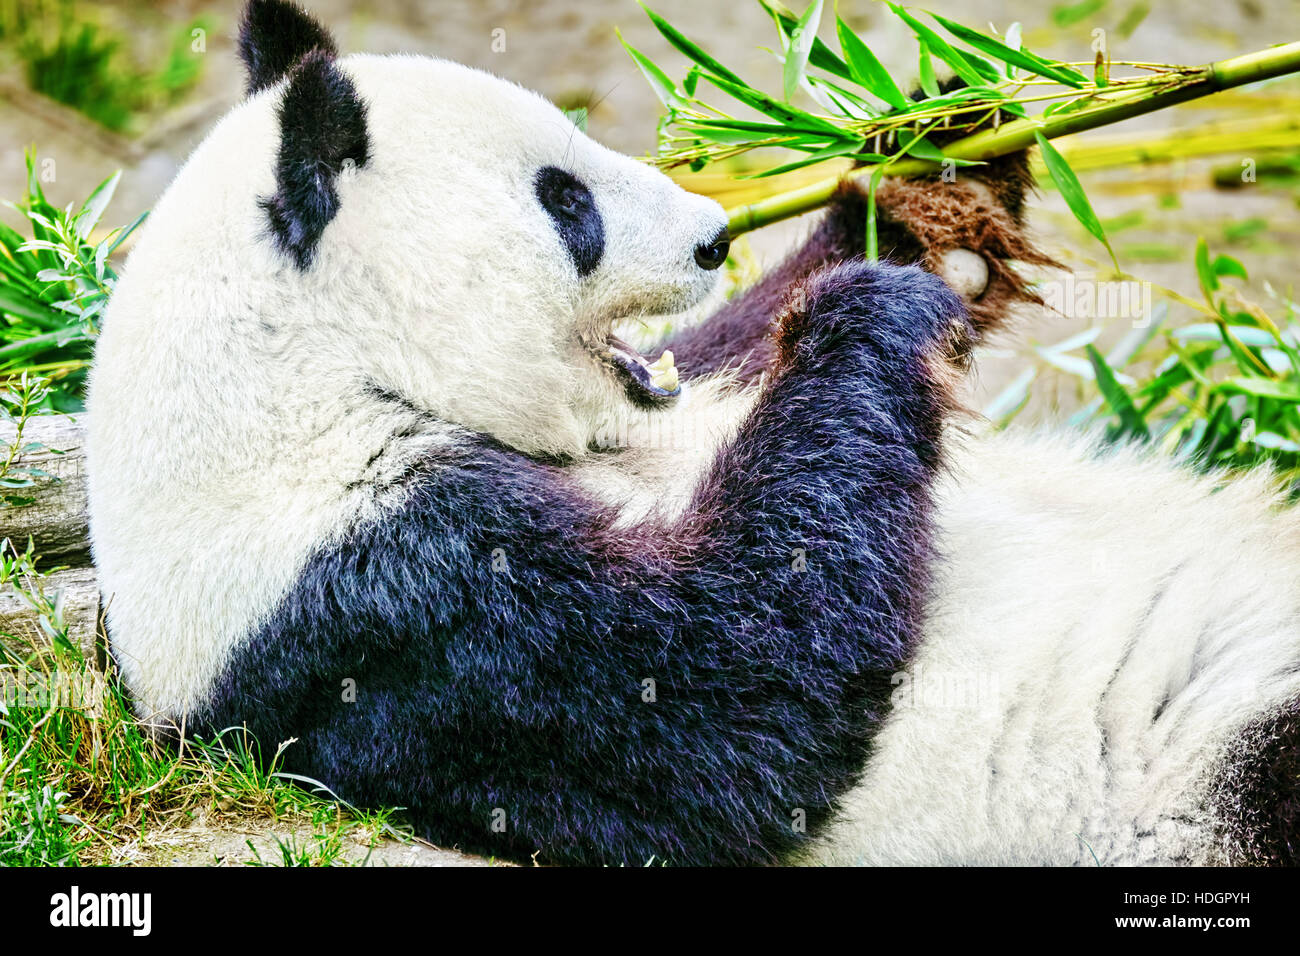 Cute bear panda actively chew a green bamboo sprout. Stock Photo